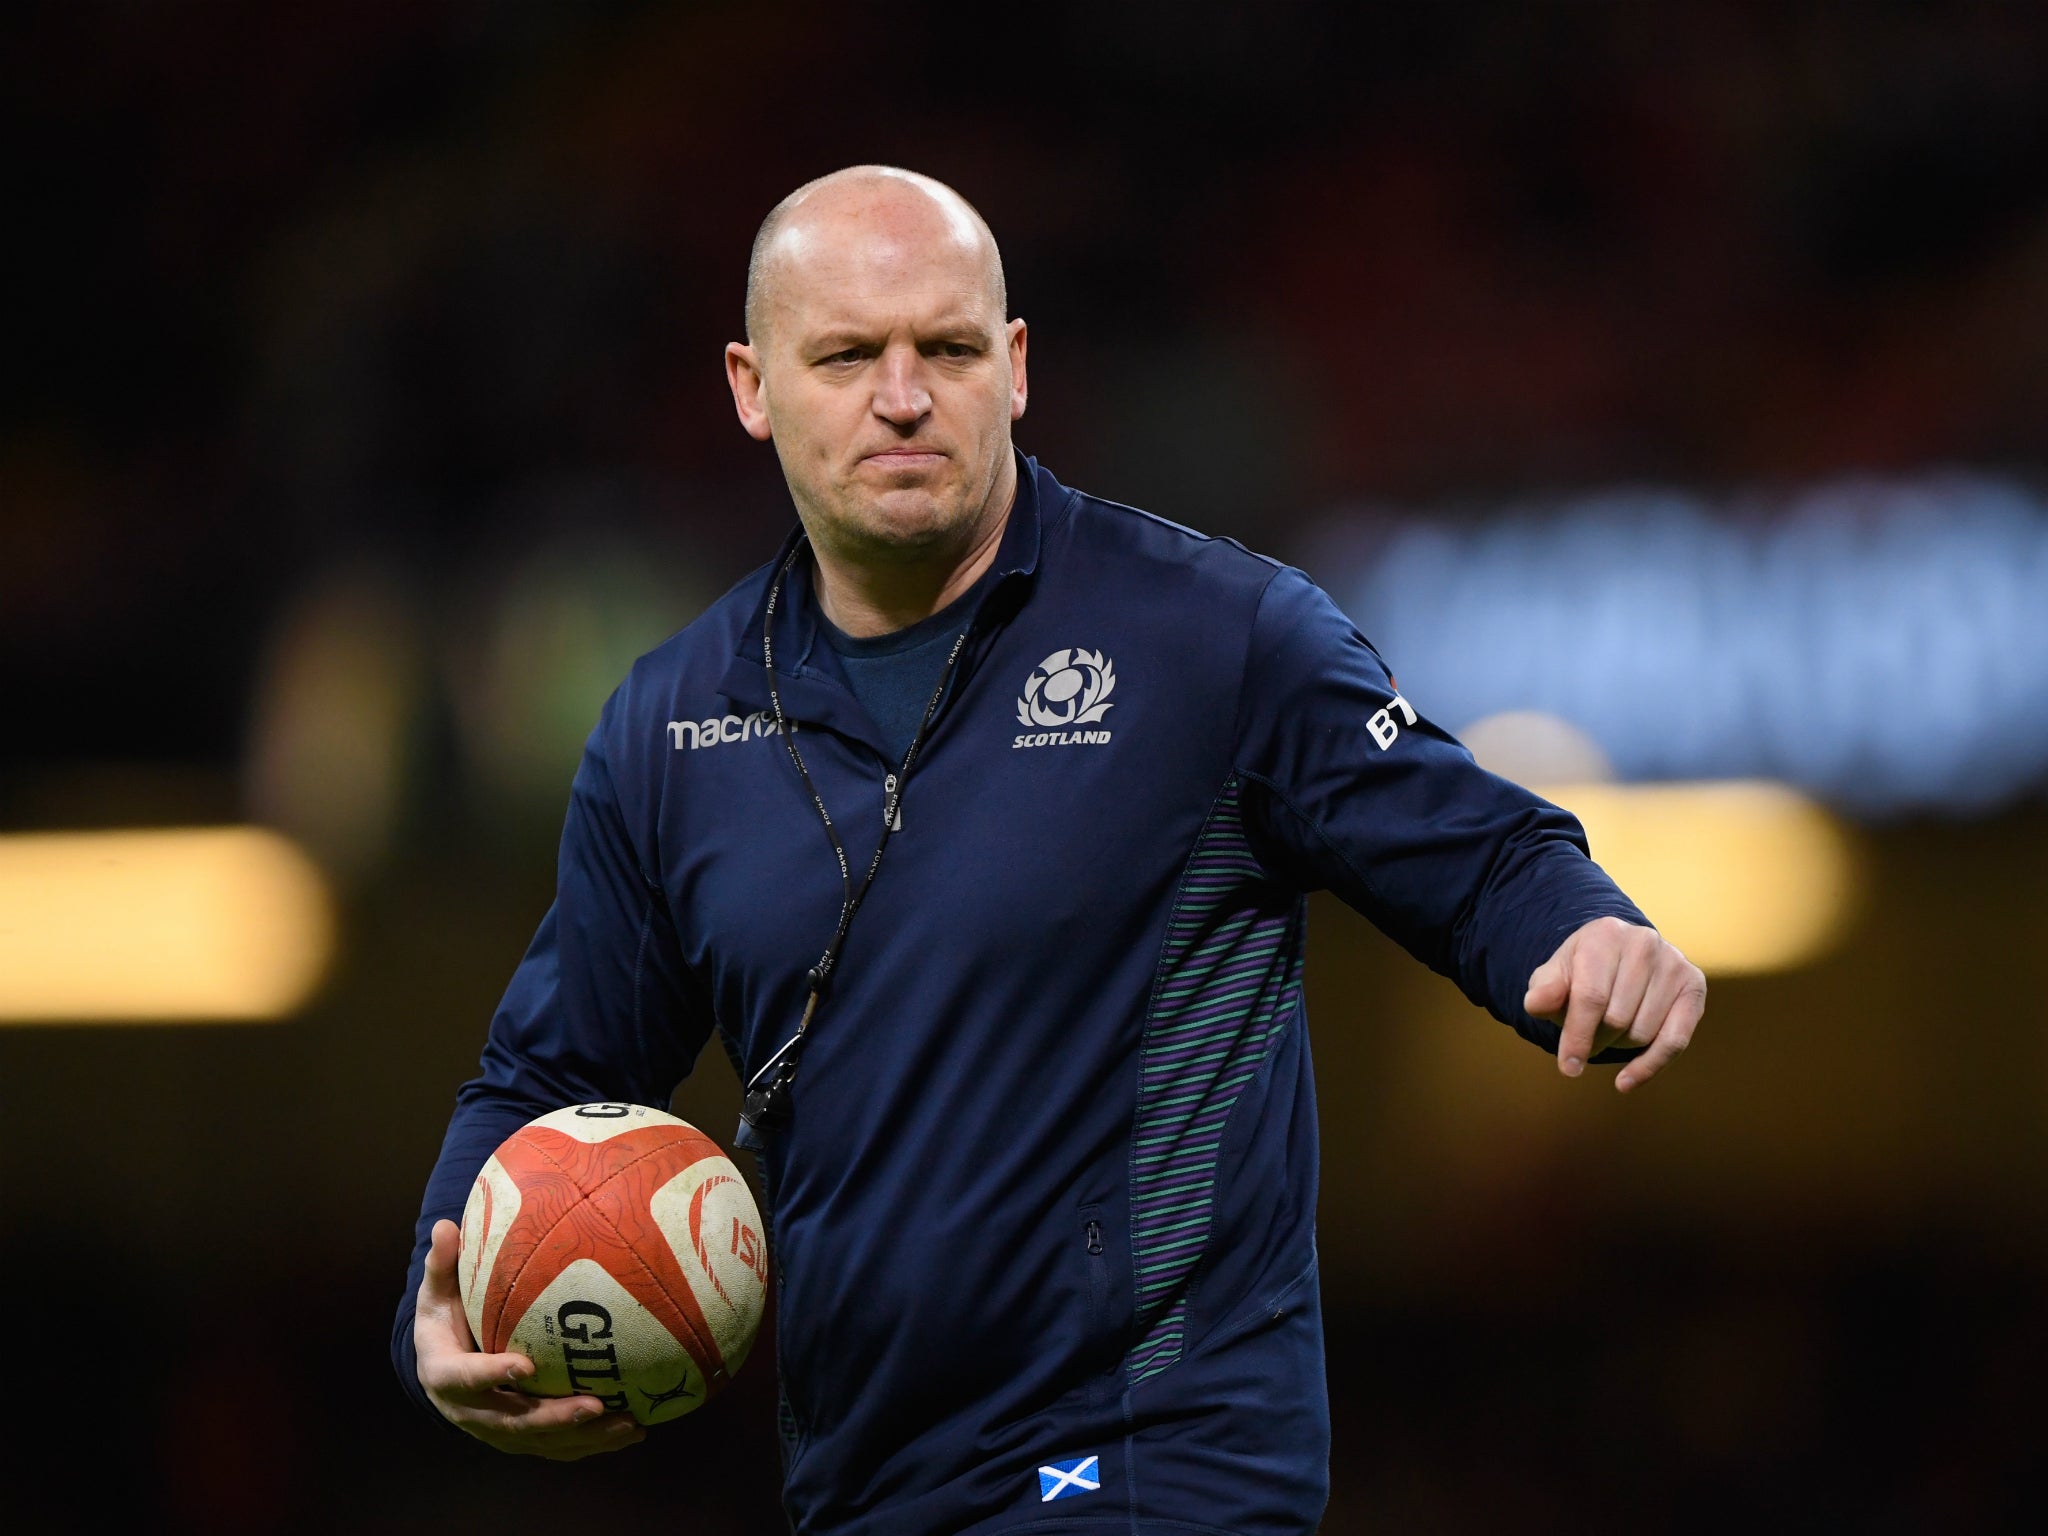 Gregor Townsend blamed himself for the 34-7 defeat by Wales on the opening weekend of the Six Nations